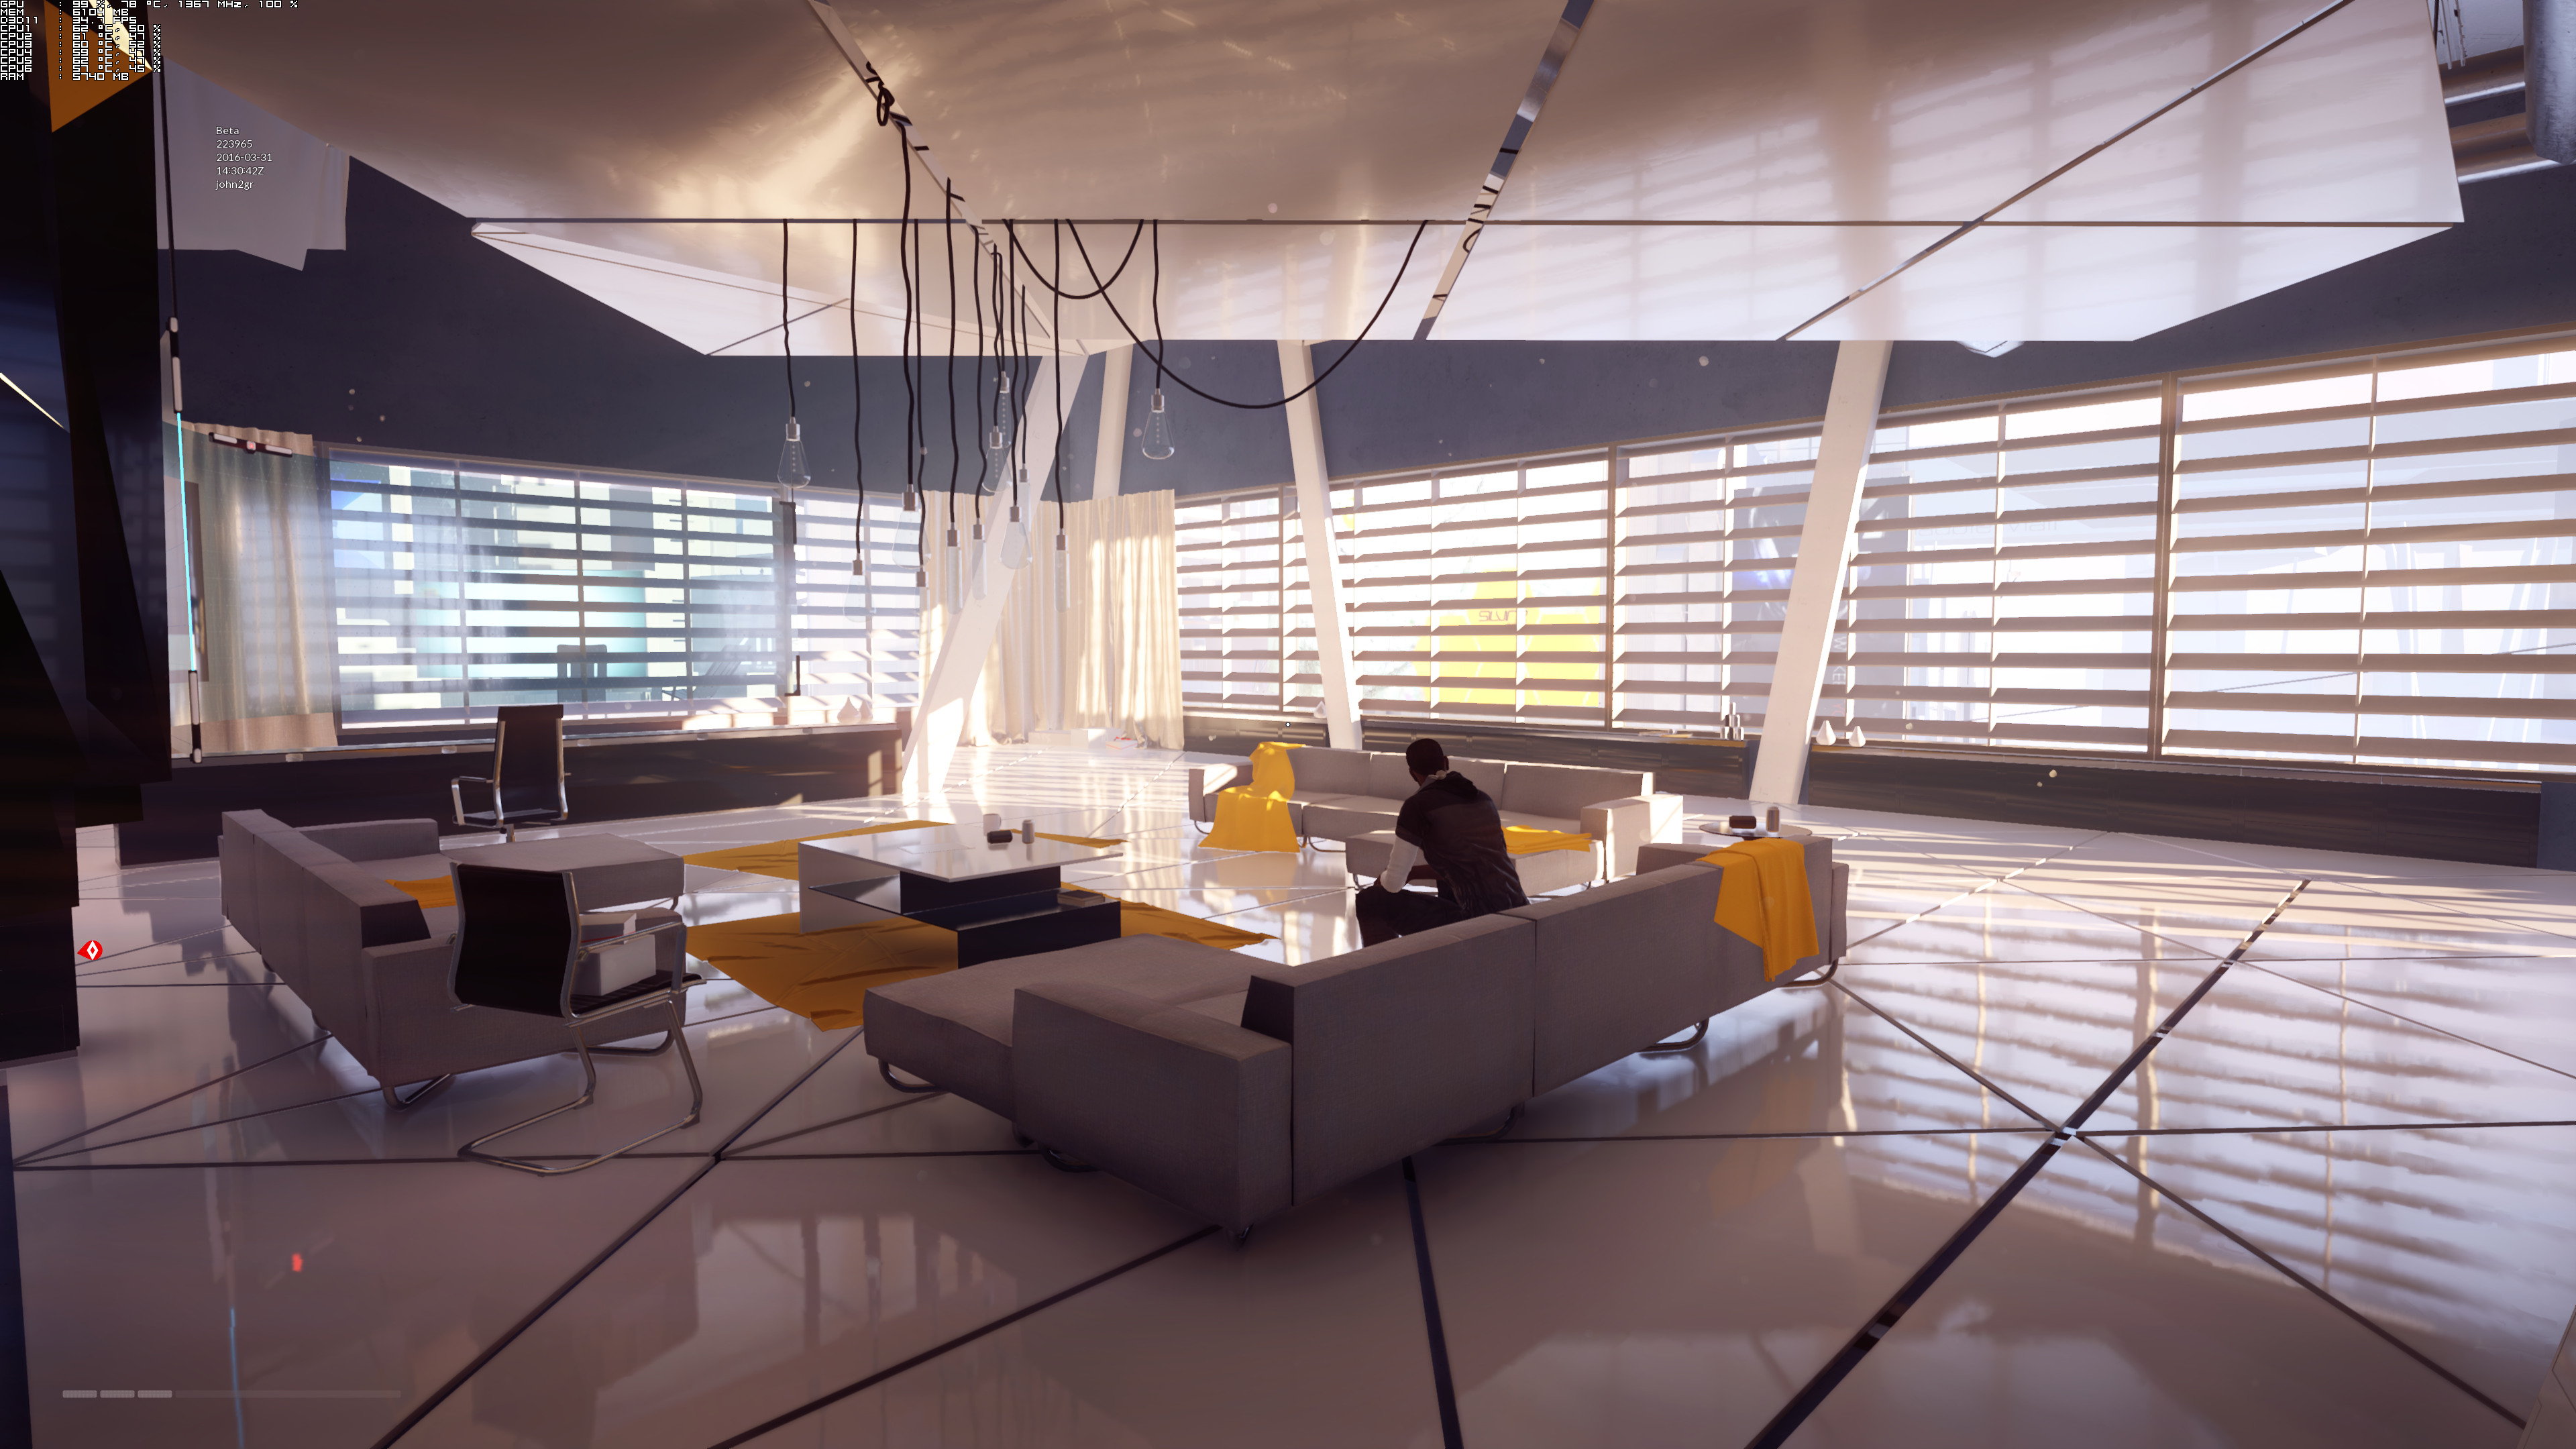 Mirror S Edge Catalyst 4k Screenshots From Closed Beta Initial Performance Impressions